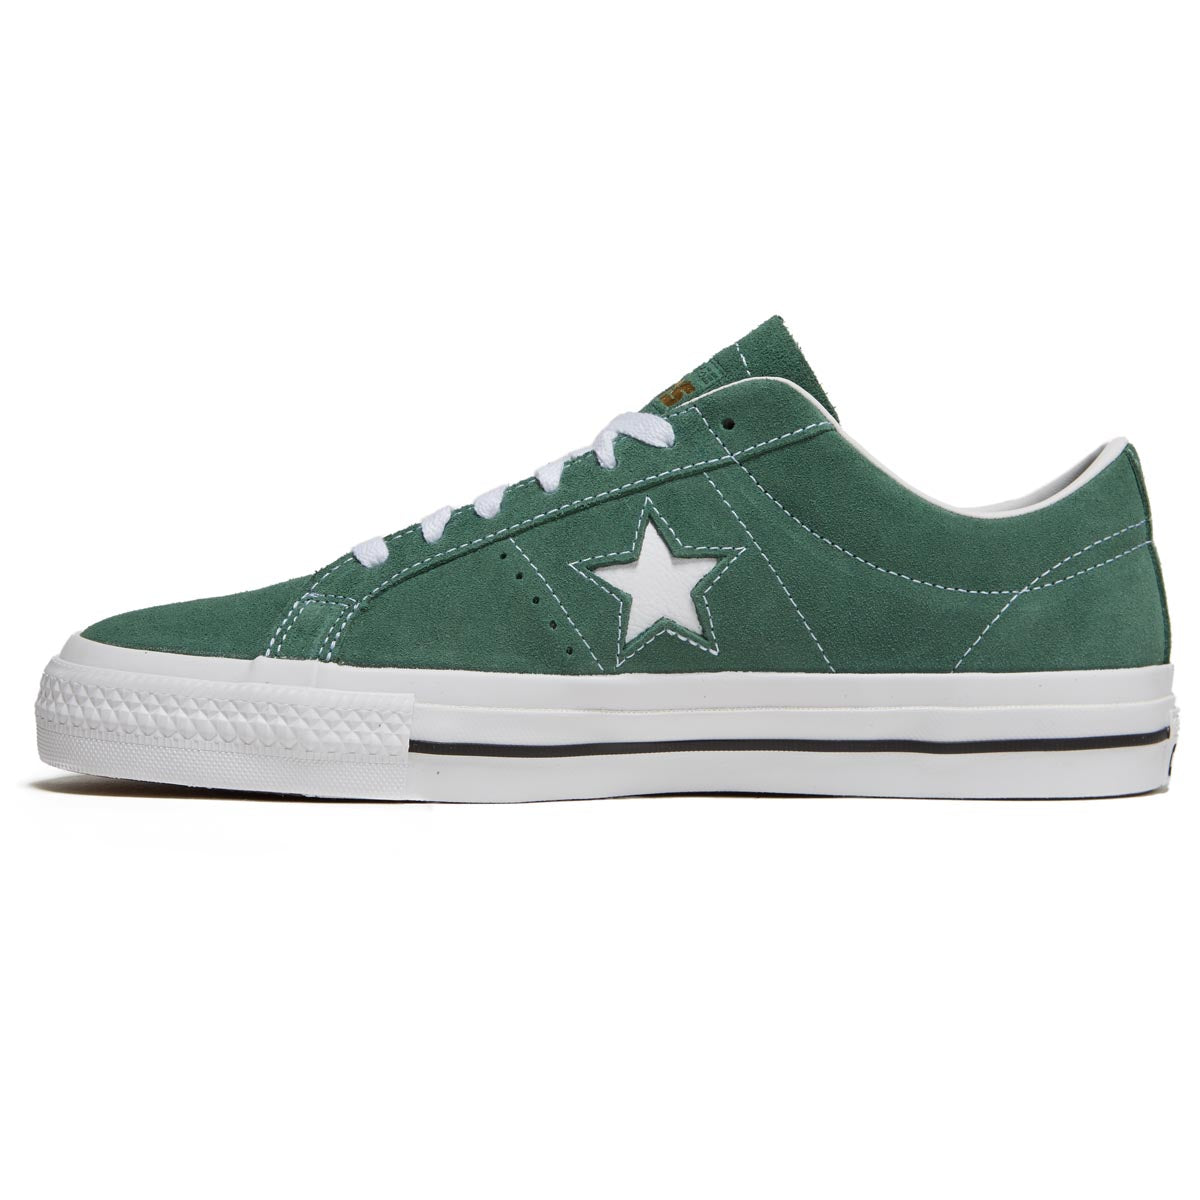 Converse One Star Pro Shoes - Admiral Elm/White/Black image 2